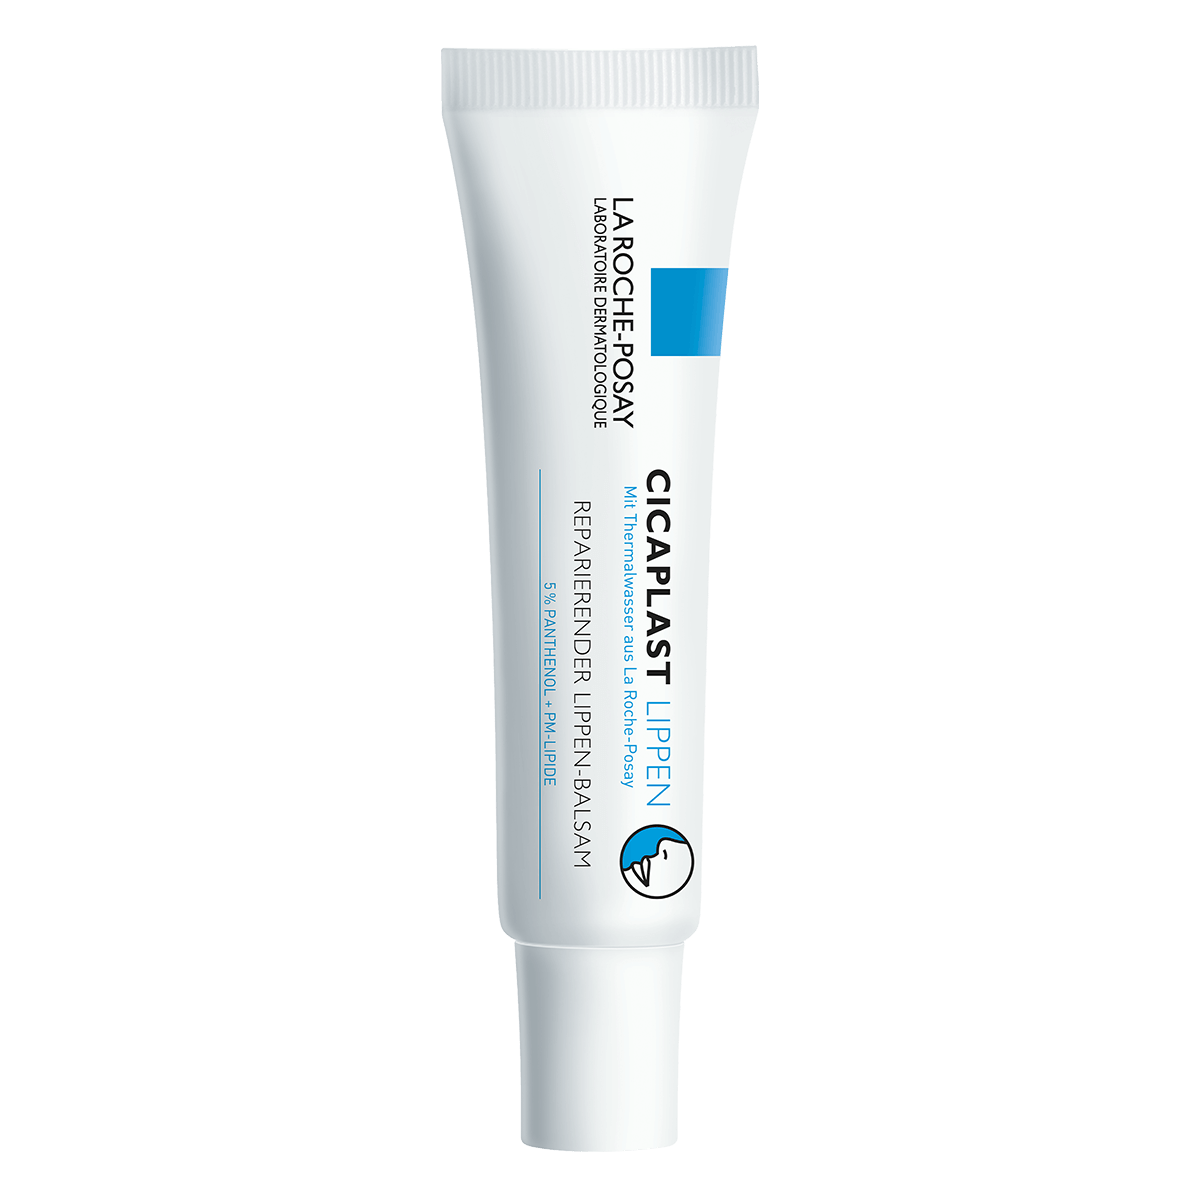 La Roche Posay ProductPage Damaged Cicaplast Gel B5 Pro Recovery 40ml 3337875586269